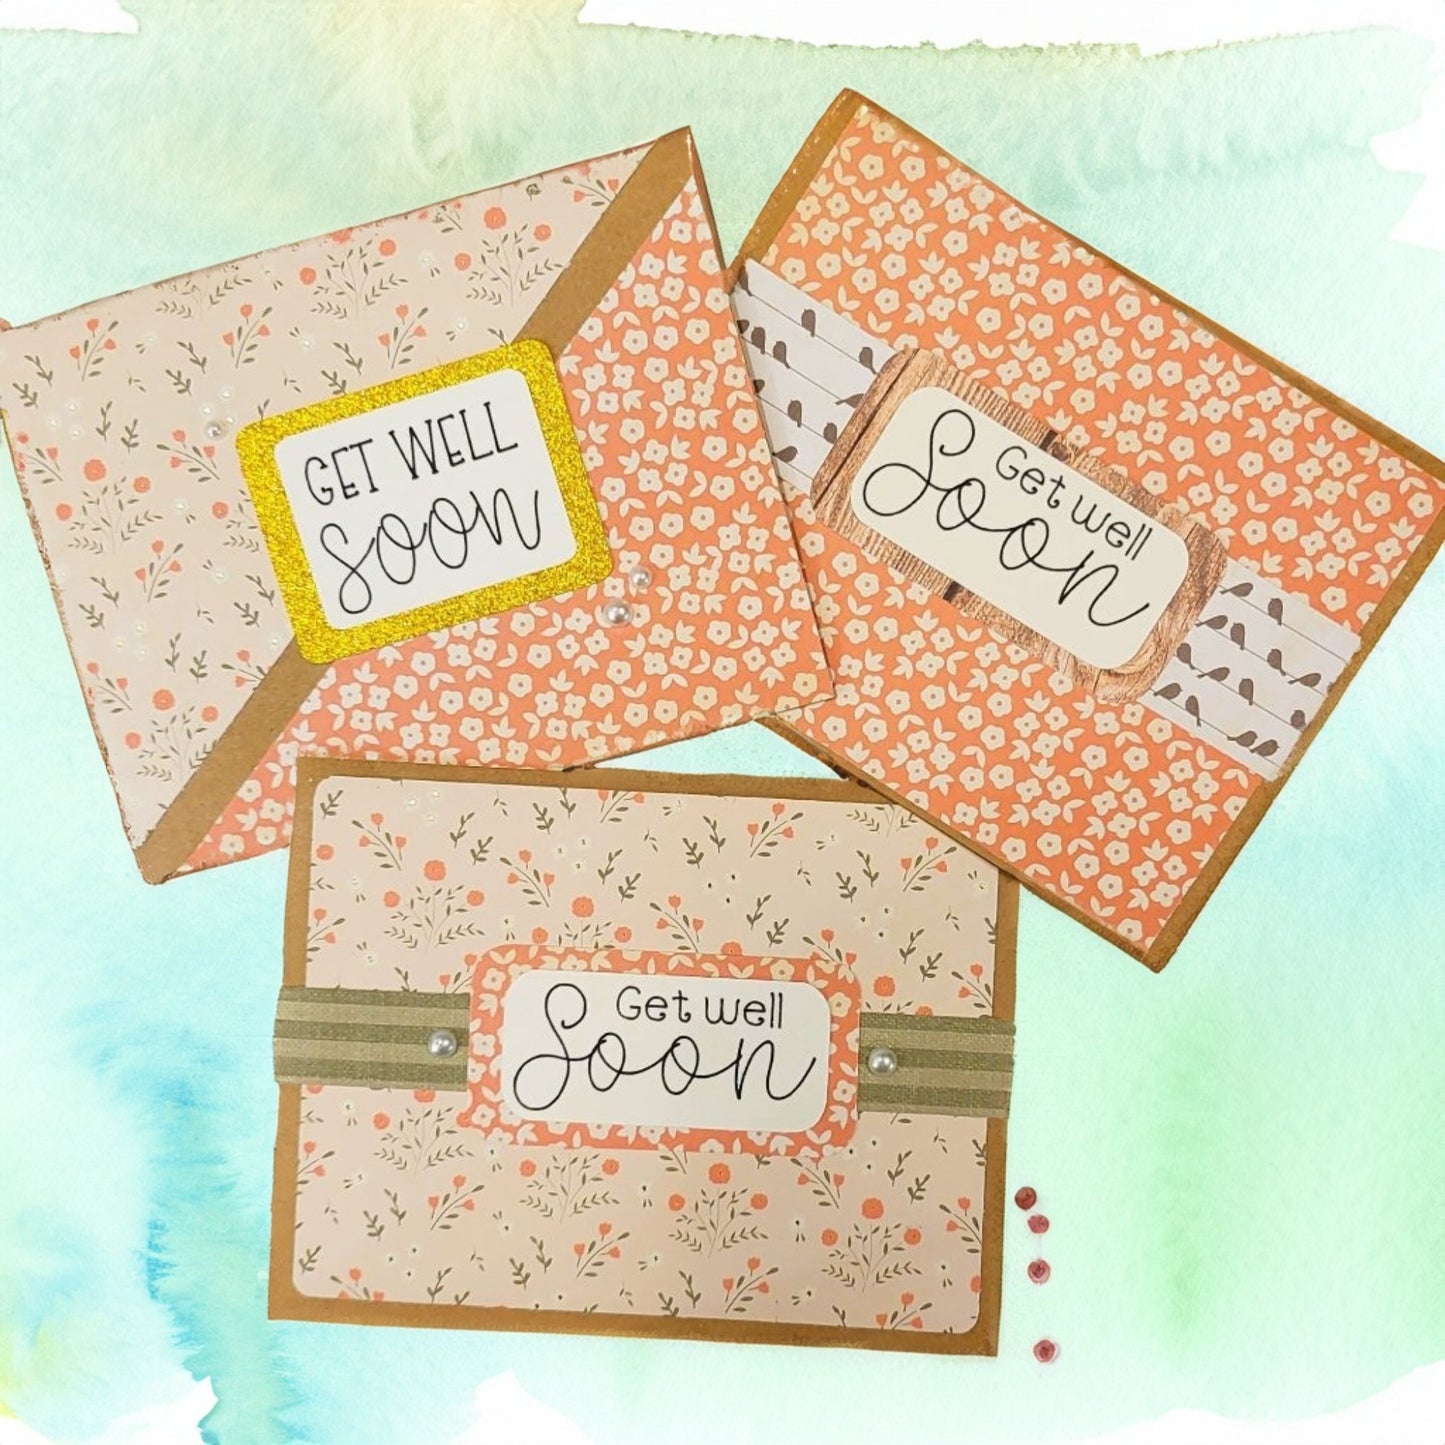 Get Well Soon, Coral Florals - Be Well - 31 Rubies Designs